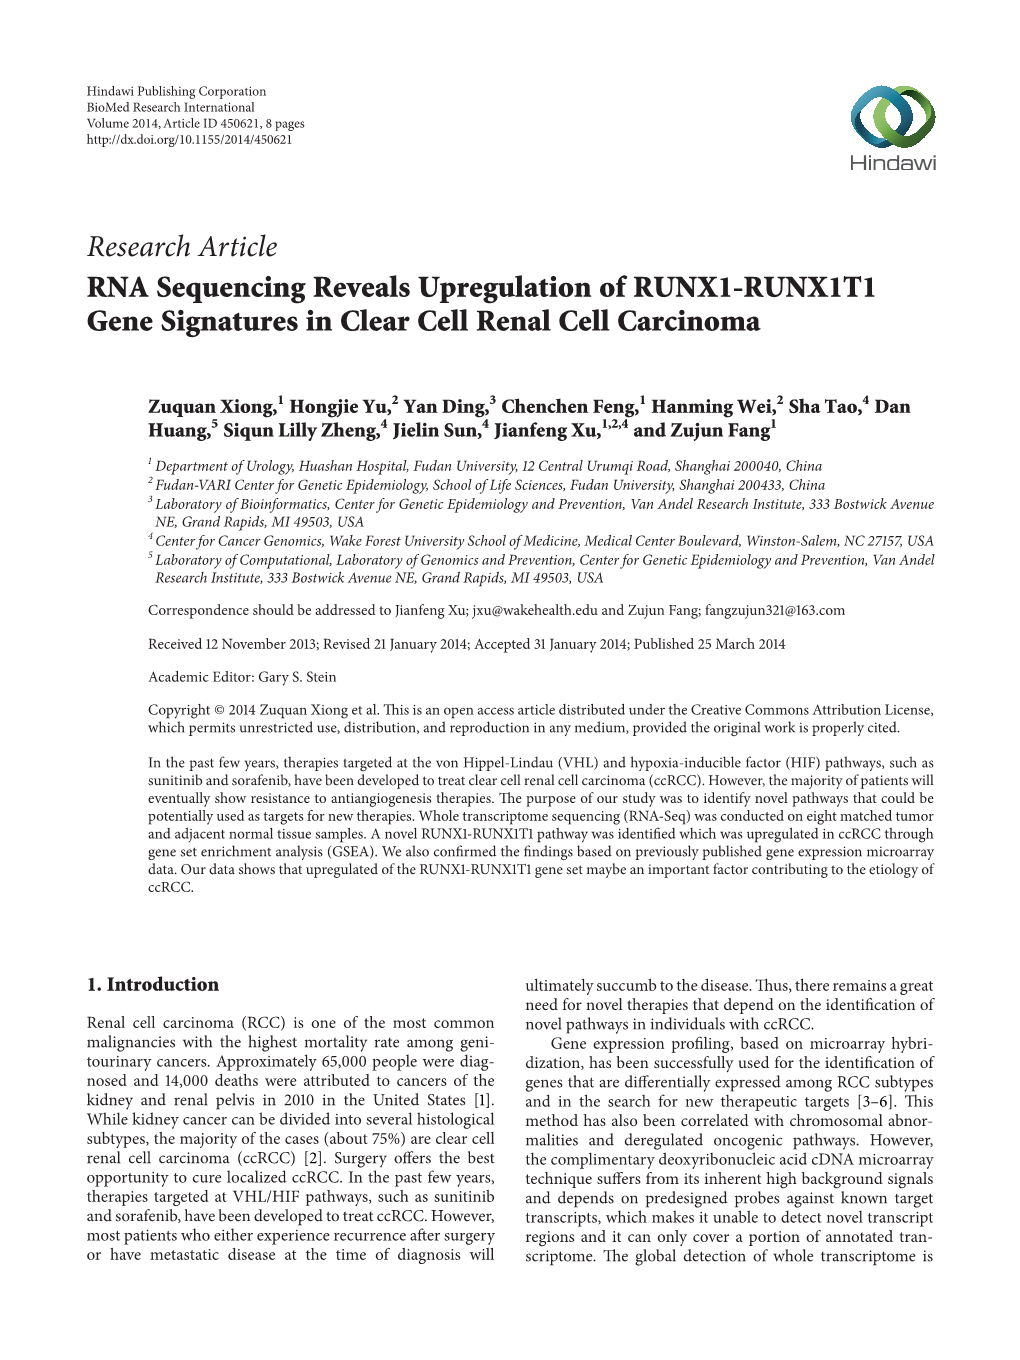 RNA Sequencing Reveals Upregulation of RUNX1-RUNX1T1 Gene Signatures in Clear Cell Renal Cell Carcinoma